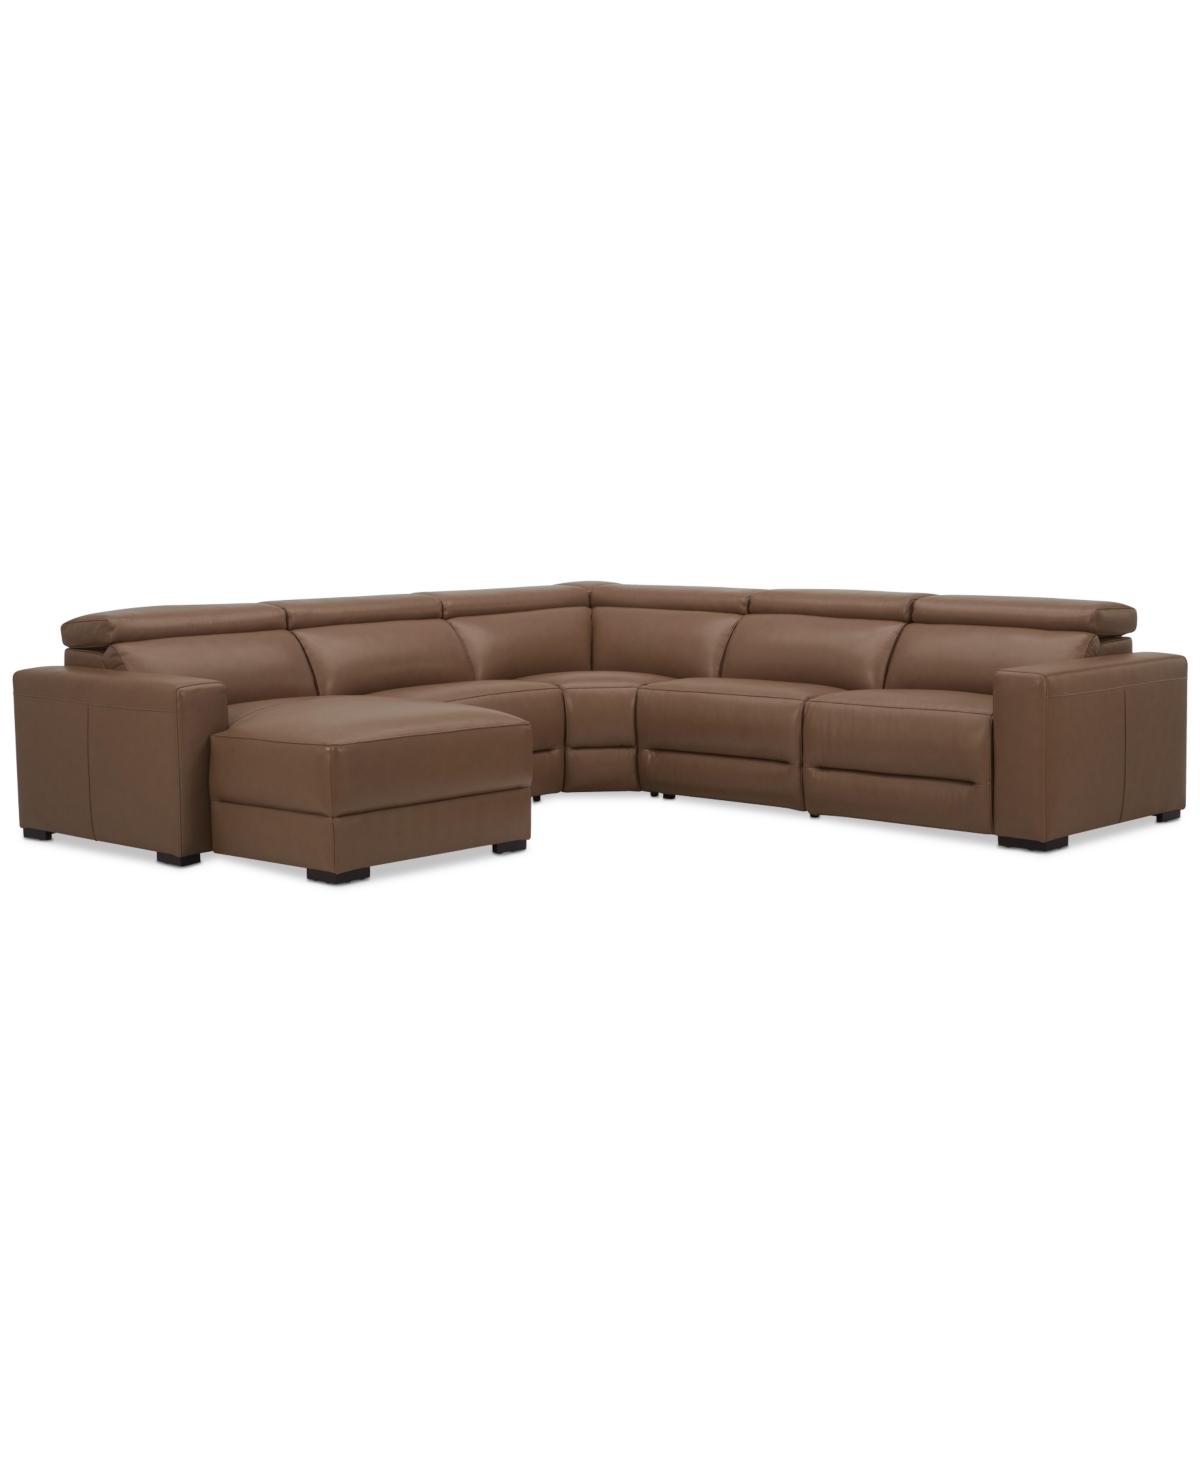 Macy's Nevio 157" 6-pc. Leather Sectional With 2 Power Recliners, Headrests And Chaise, Created For  In Butternut